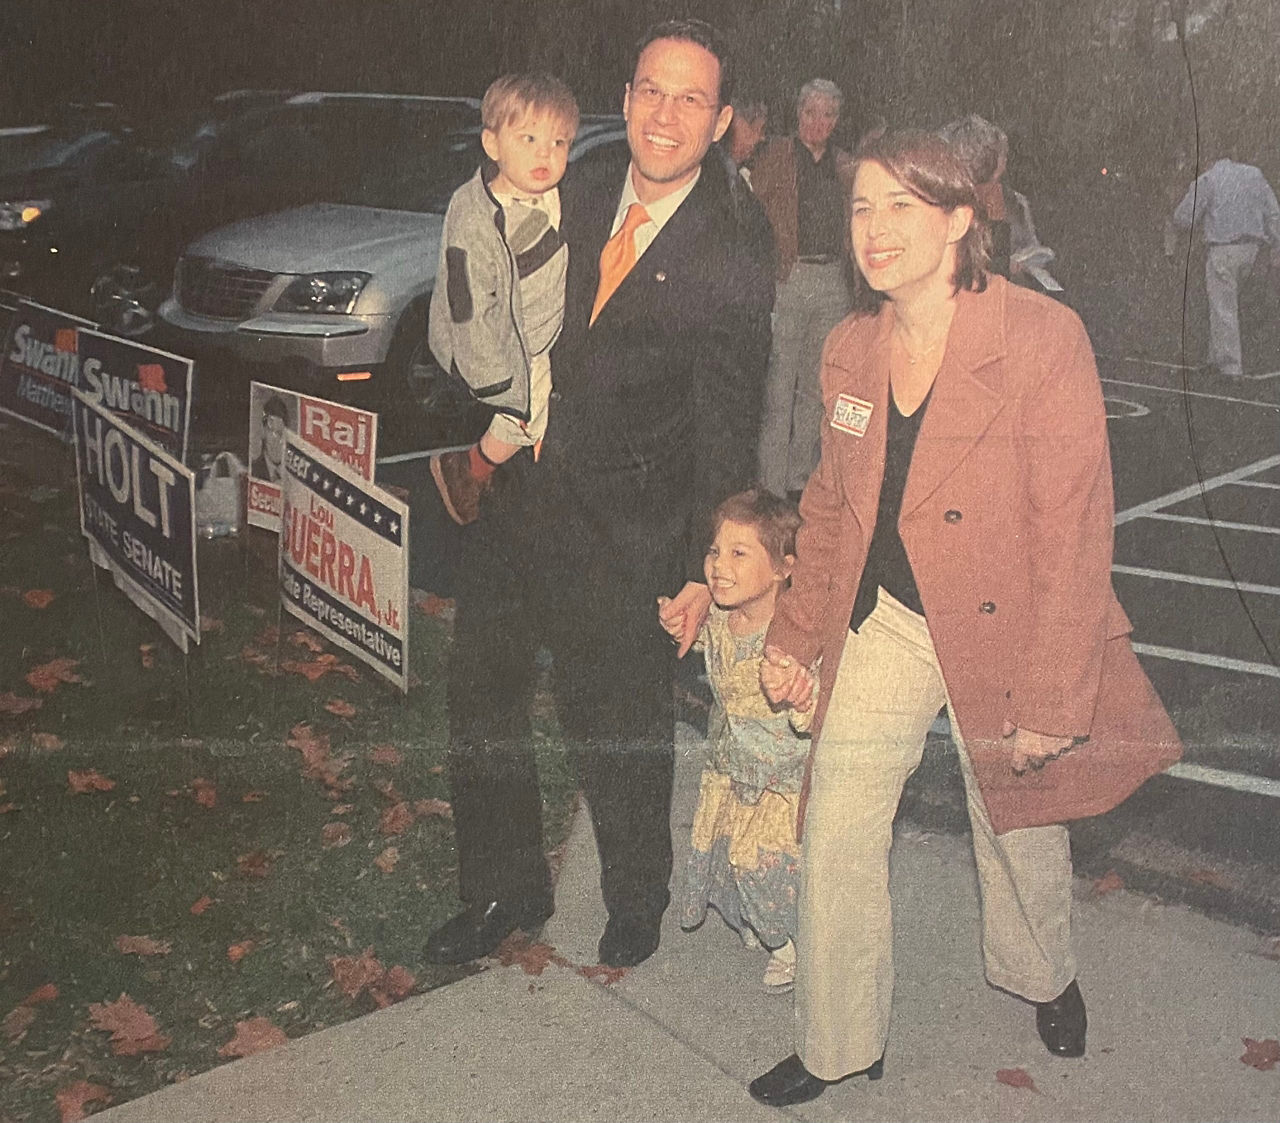 A photo of a newspaper image of Governor Josh Shapiro and First Lady Lori Shapiro walking with their children. 